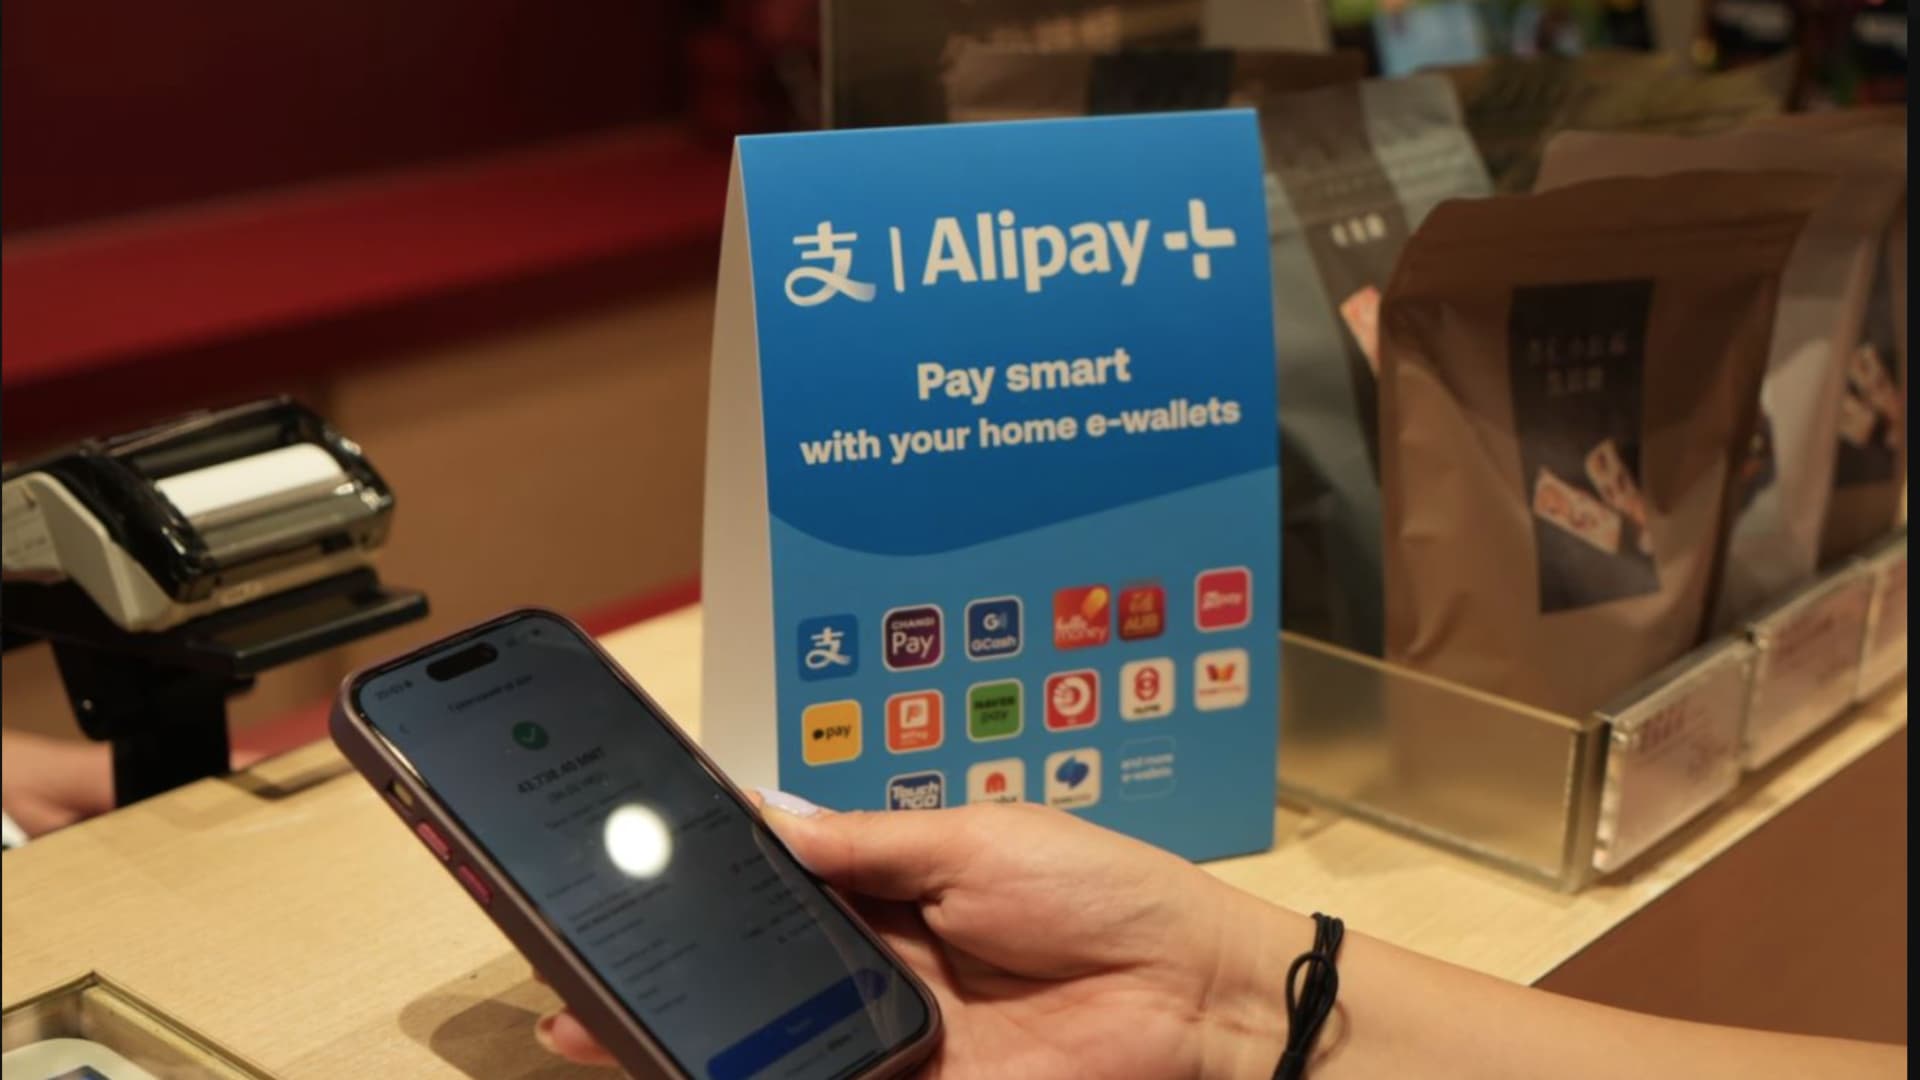 China's Ant Group doubles down on global expansion with cross-border payments offering Alipay+